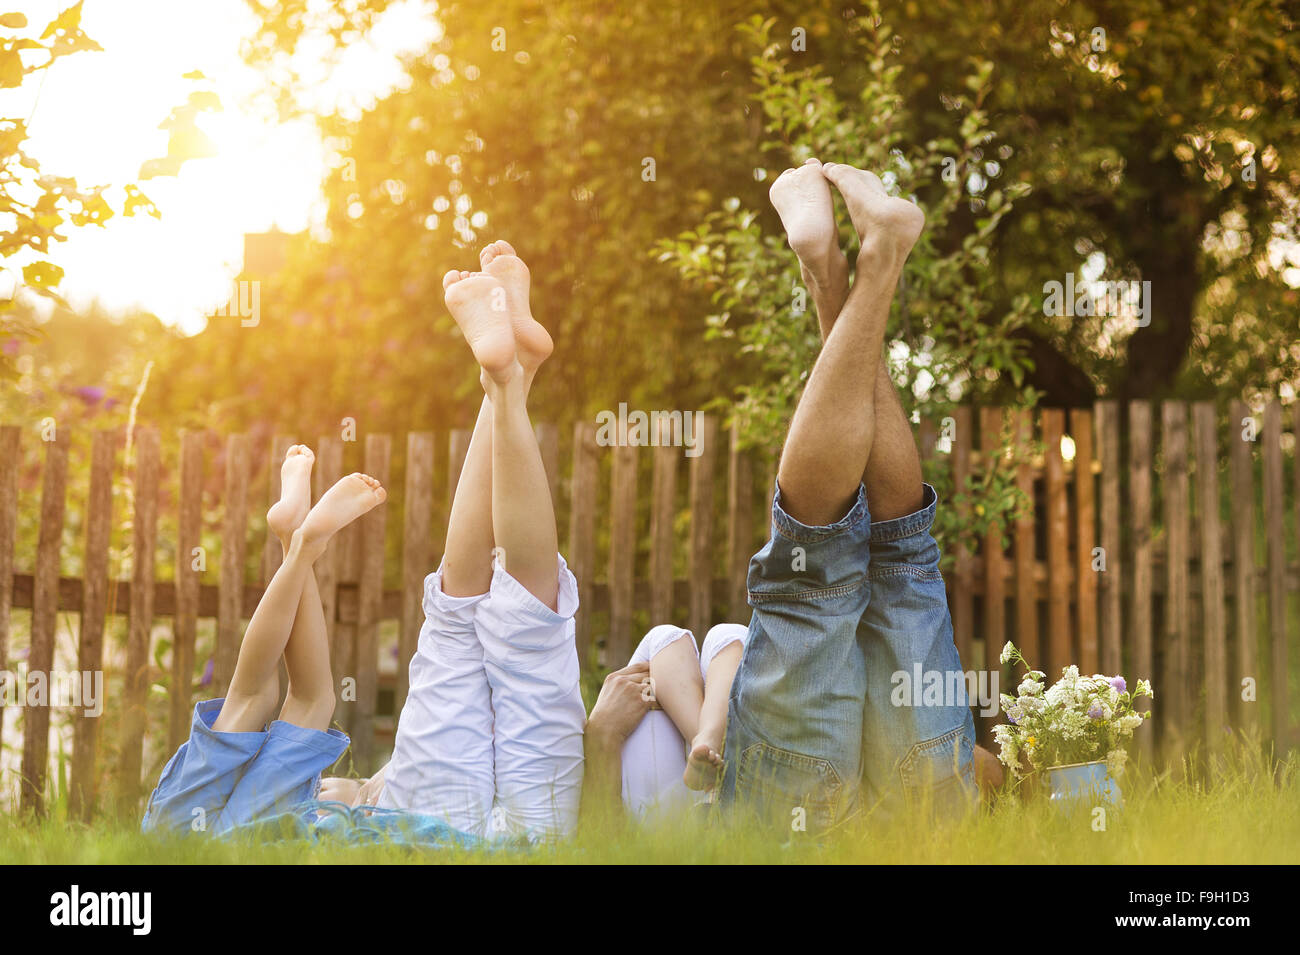 Happy young family showing legs outside in green nature. Stock Photo